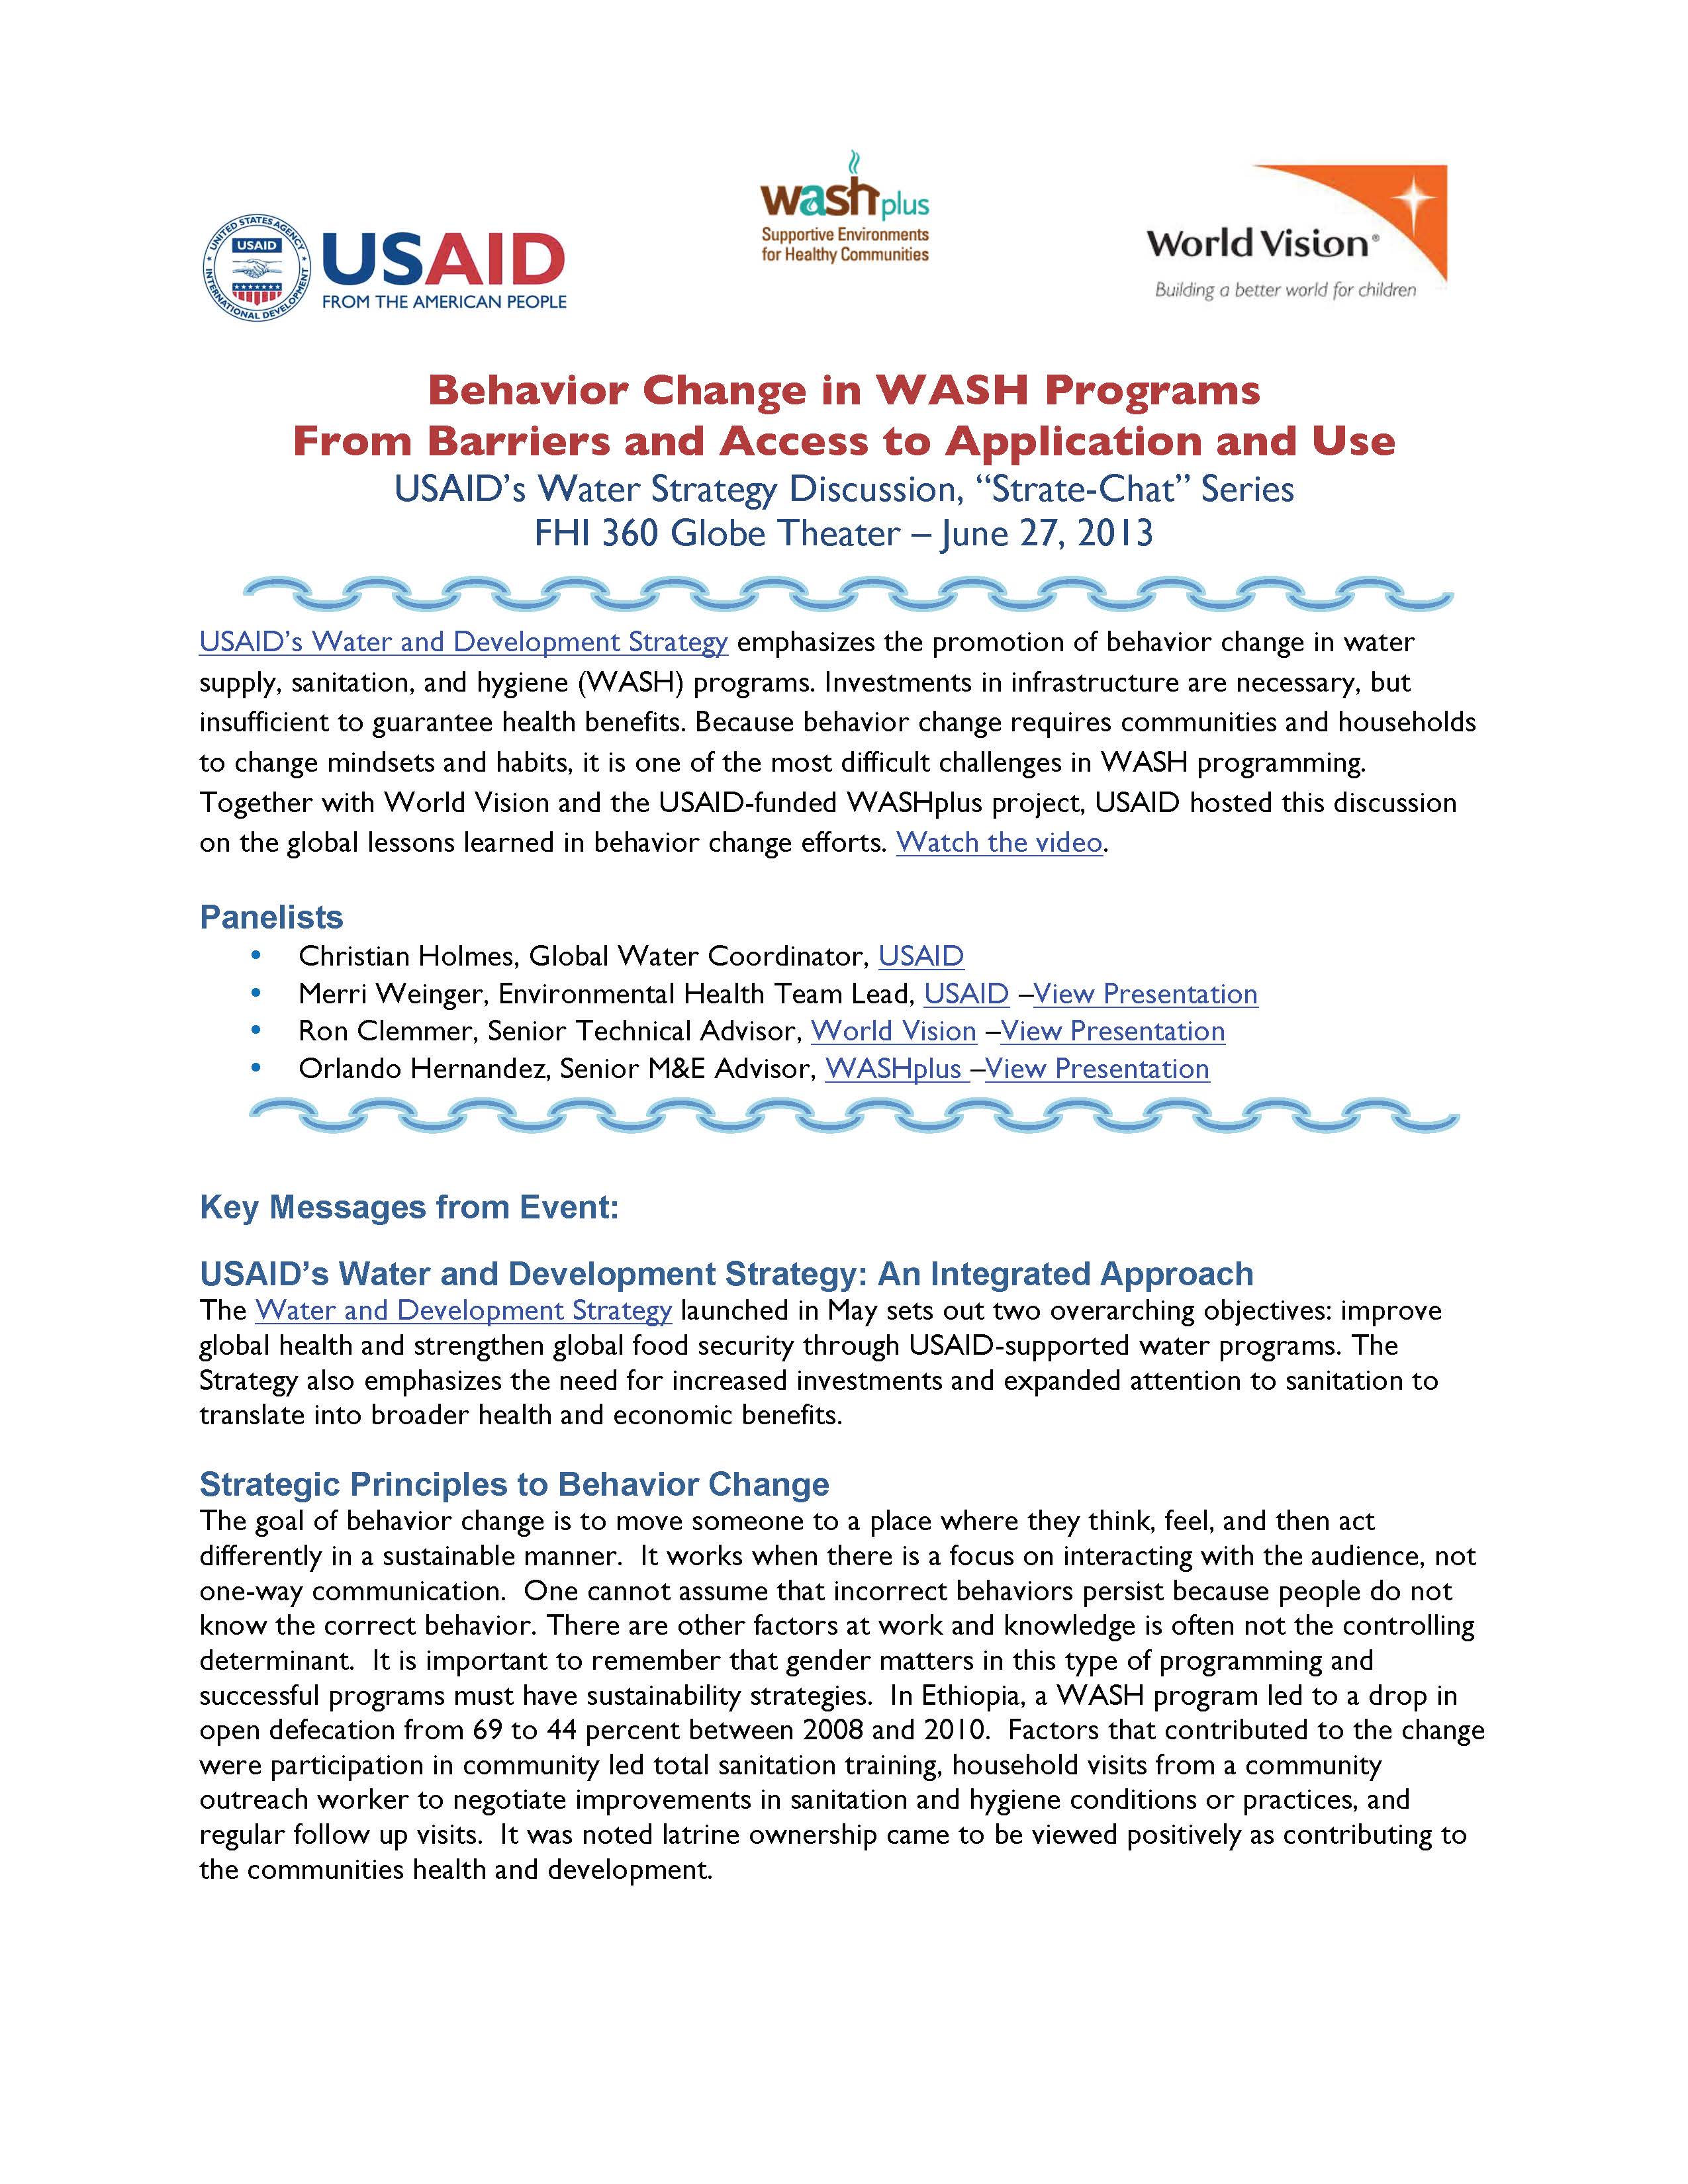 Key Takeaways - Behavior Change in WASH Programs: From Barriers and Access to Application and Use 